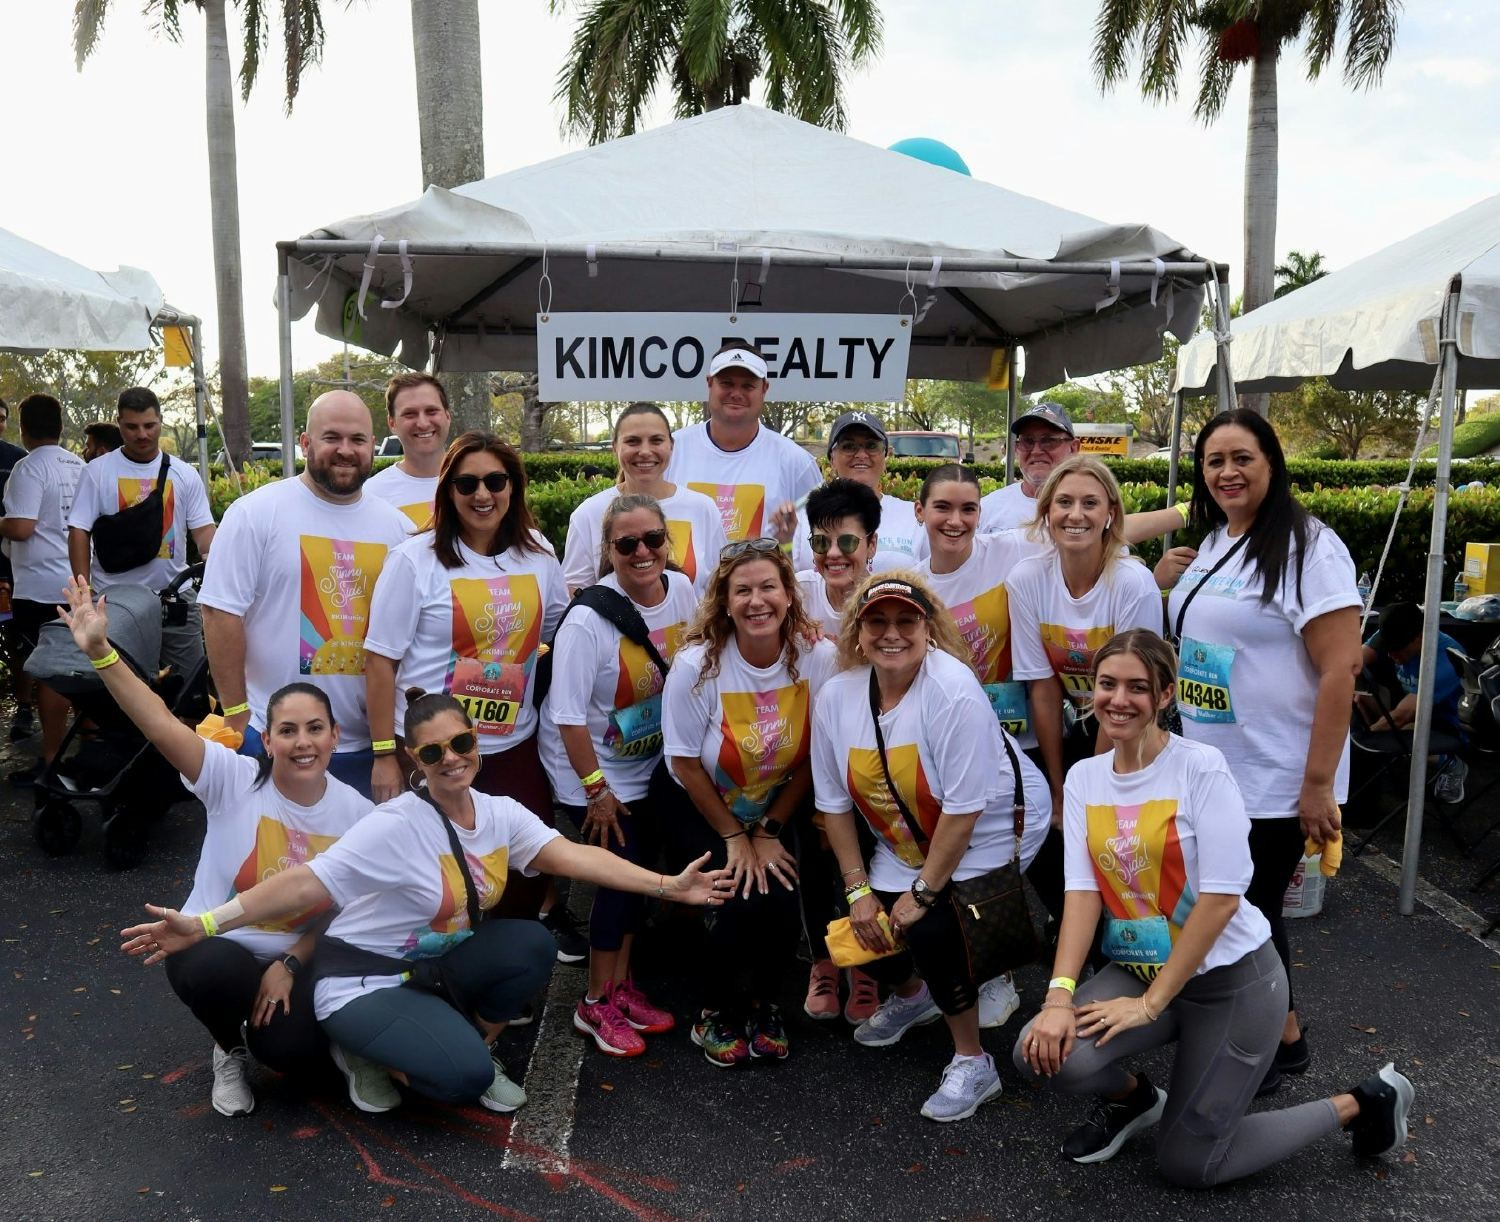 South Florida associates enjoying the 2023 Ft. Lauderdale Lexus Corporate Run, brought to you by our Fun Committee!